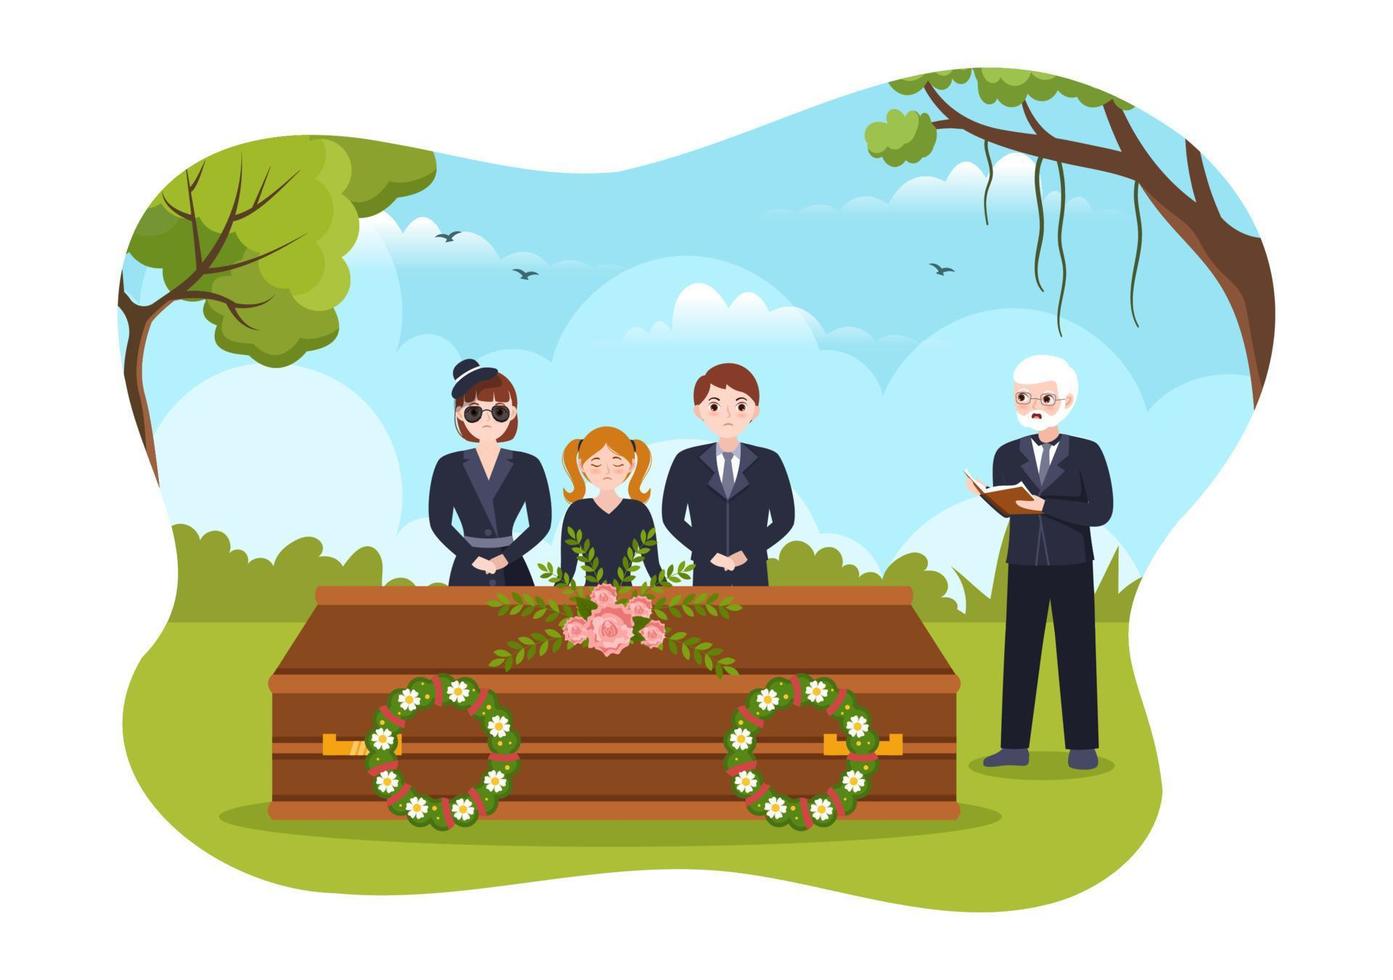 Funeral Ceremony in Grave of Sad People in Black Clothes Standing and Wreath Around Coffin in Flat Cartoon Hand Drawn Template Illustration vector